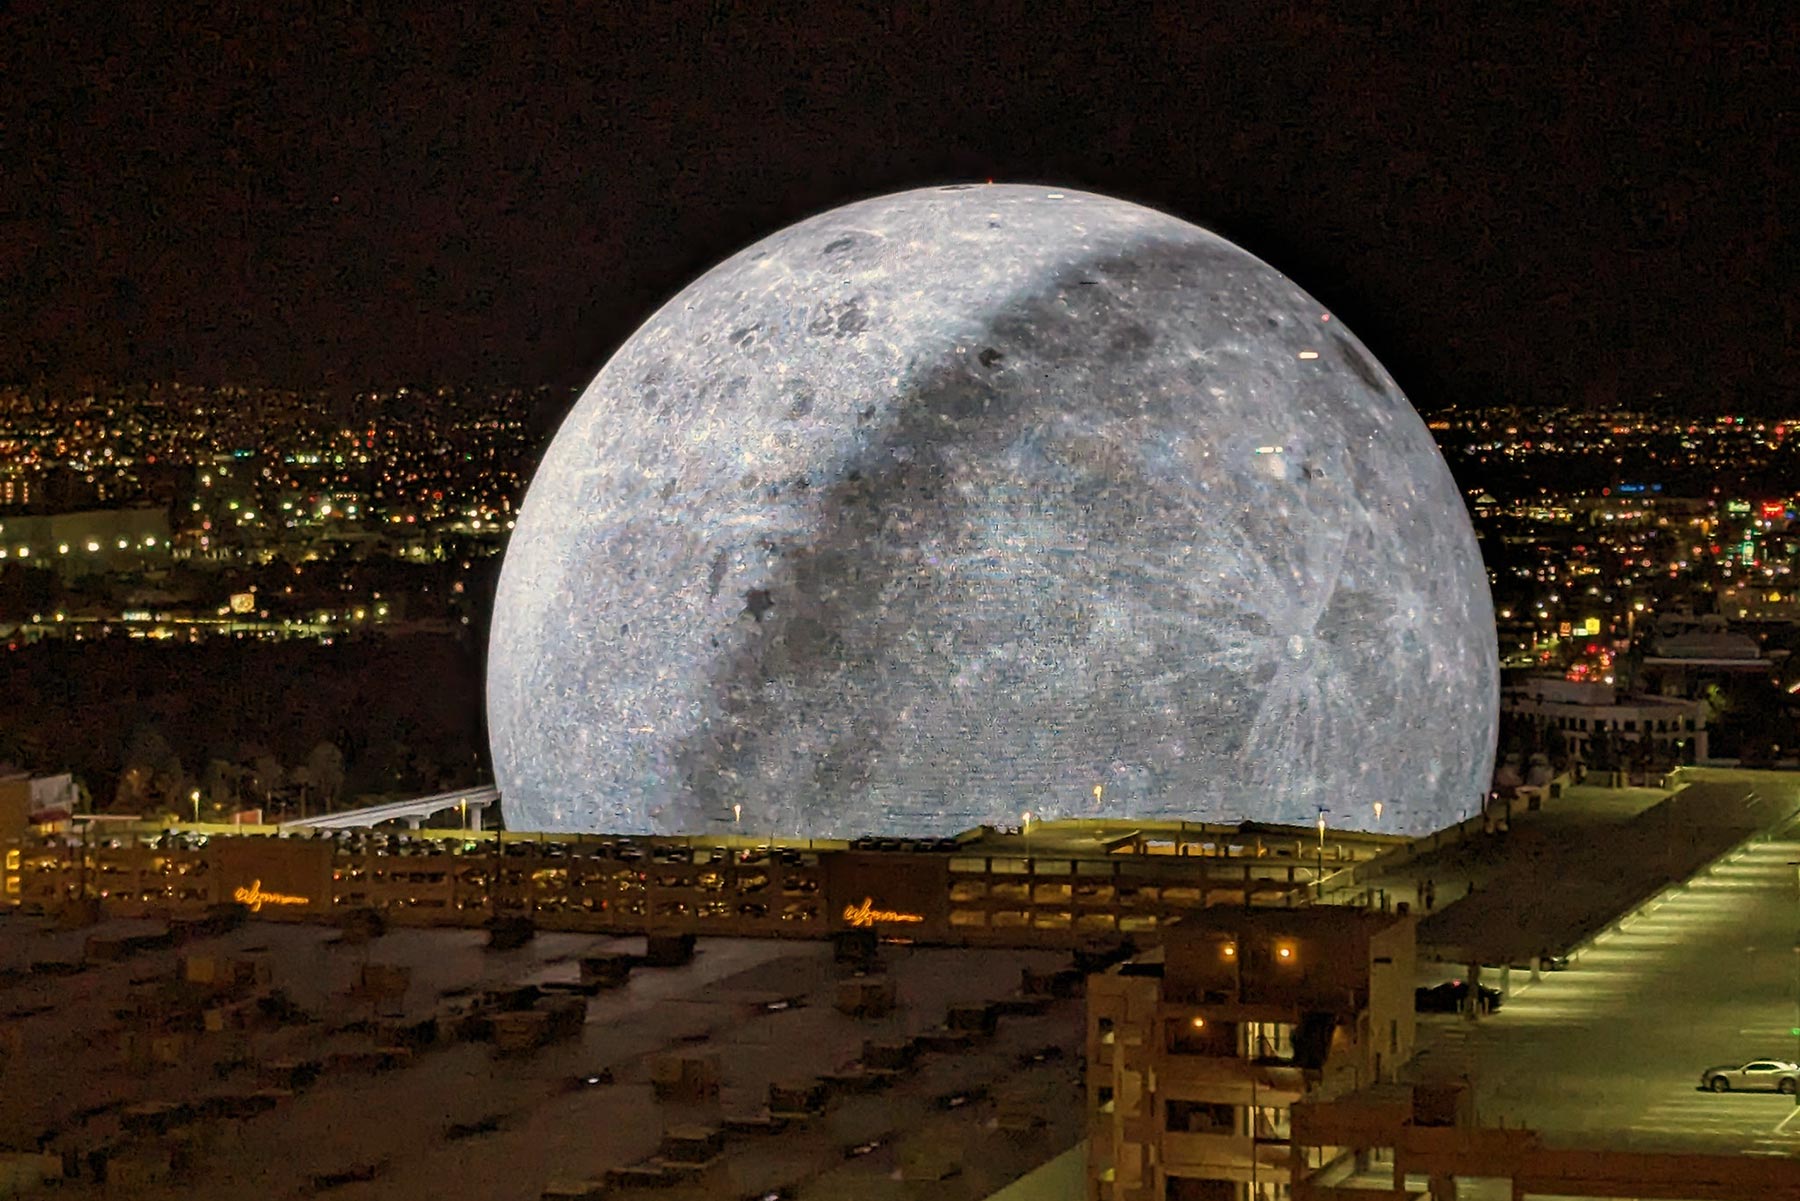 The Sphere as the moon as seen from Harrah's in Las Vegas, Nevada. 